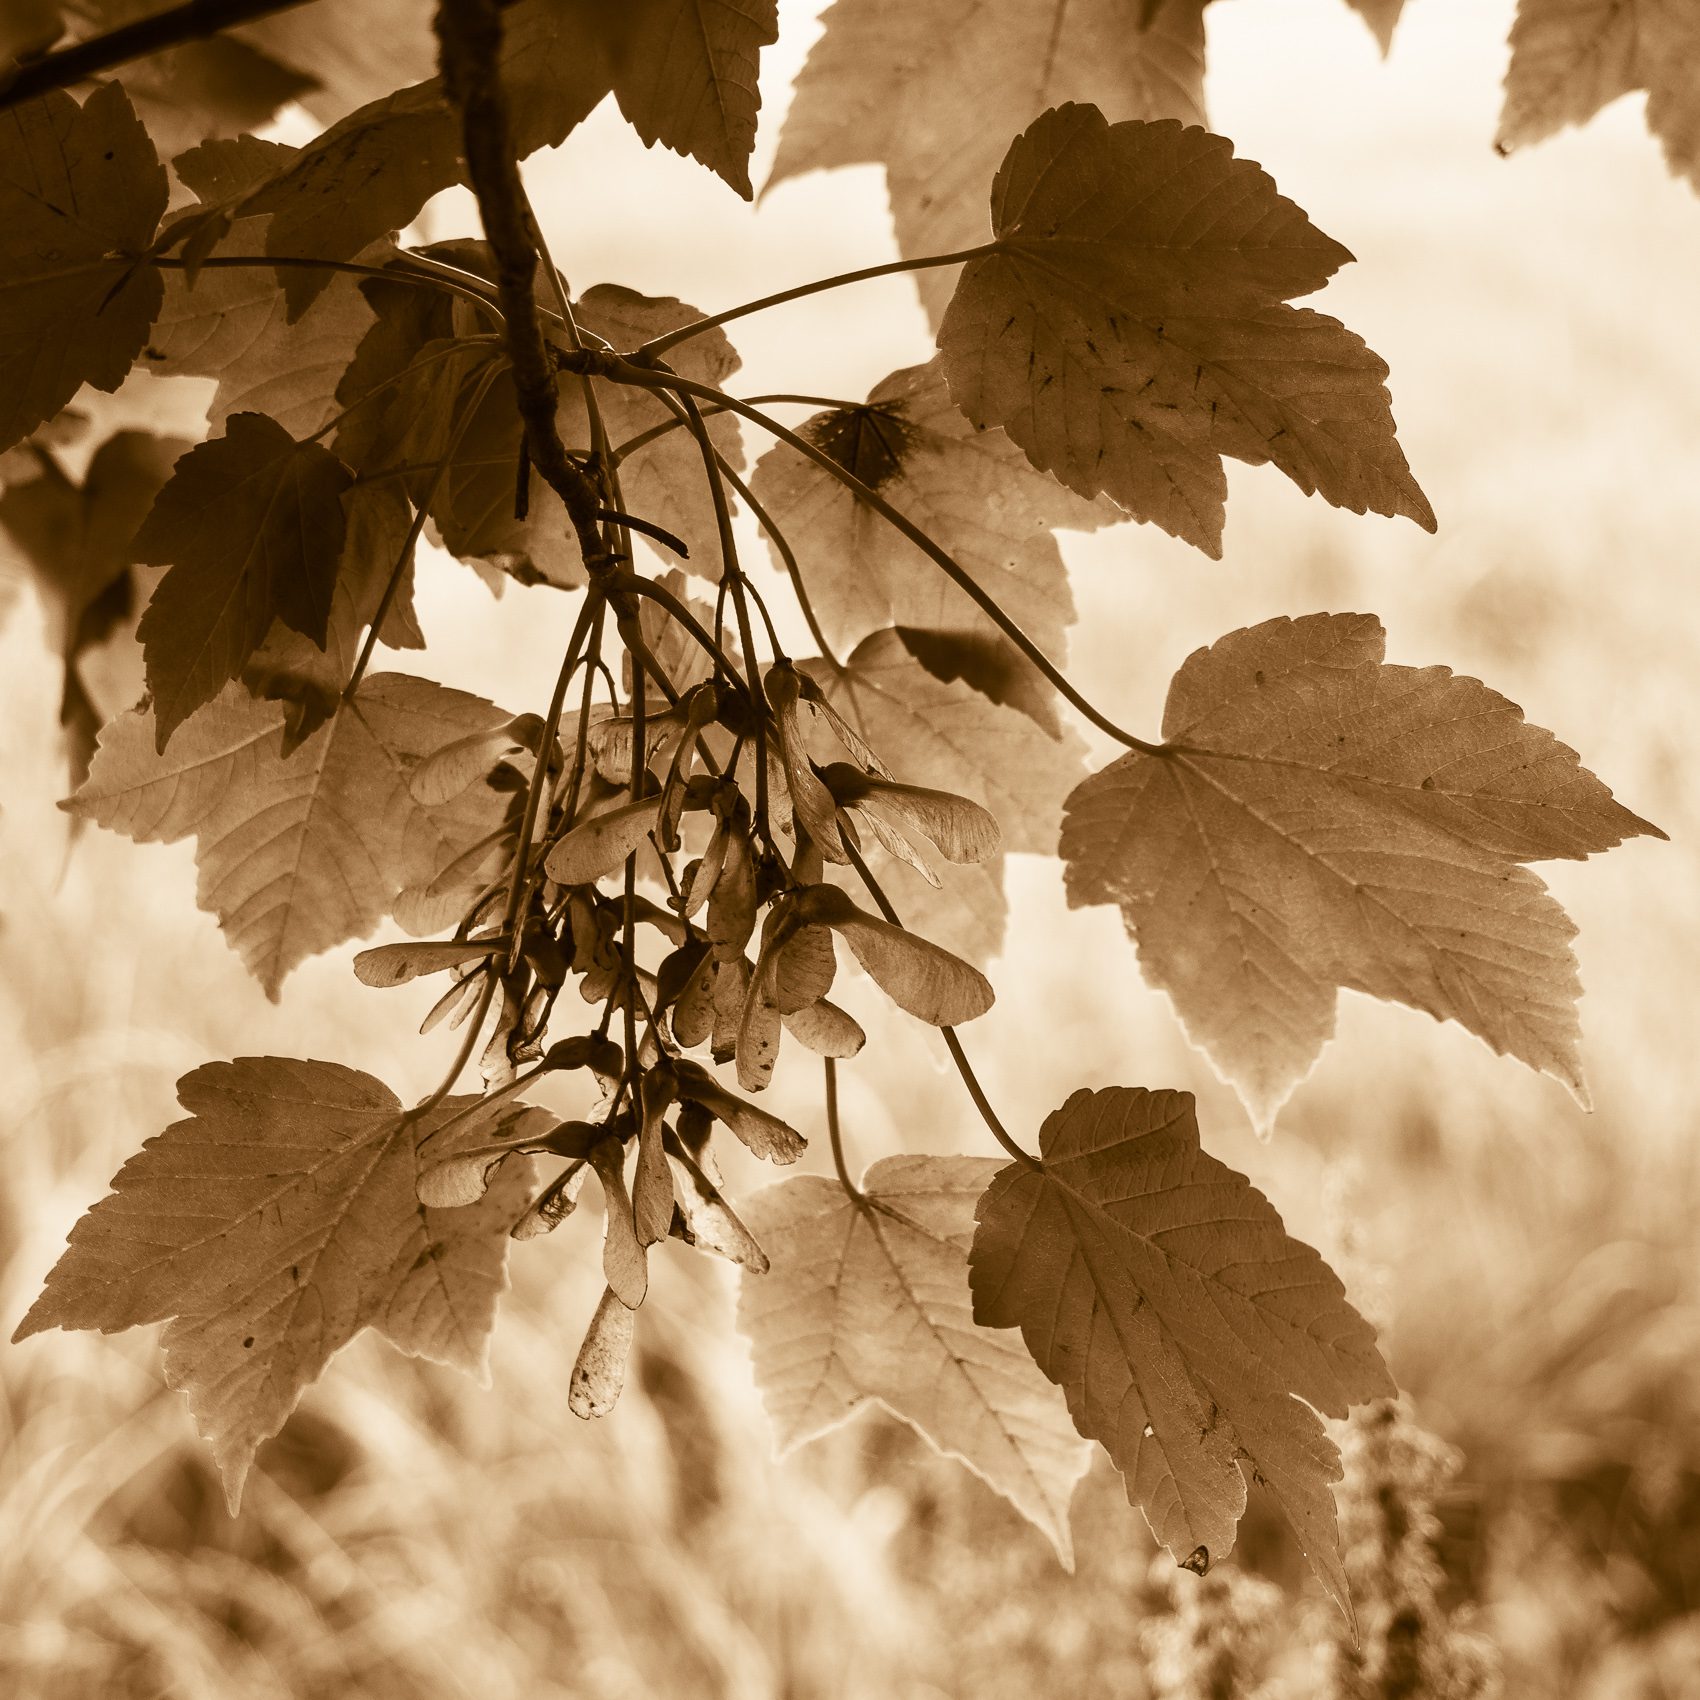 Sepia-toned image of sycamore leaves and seed pods. DD099